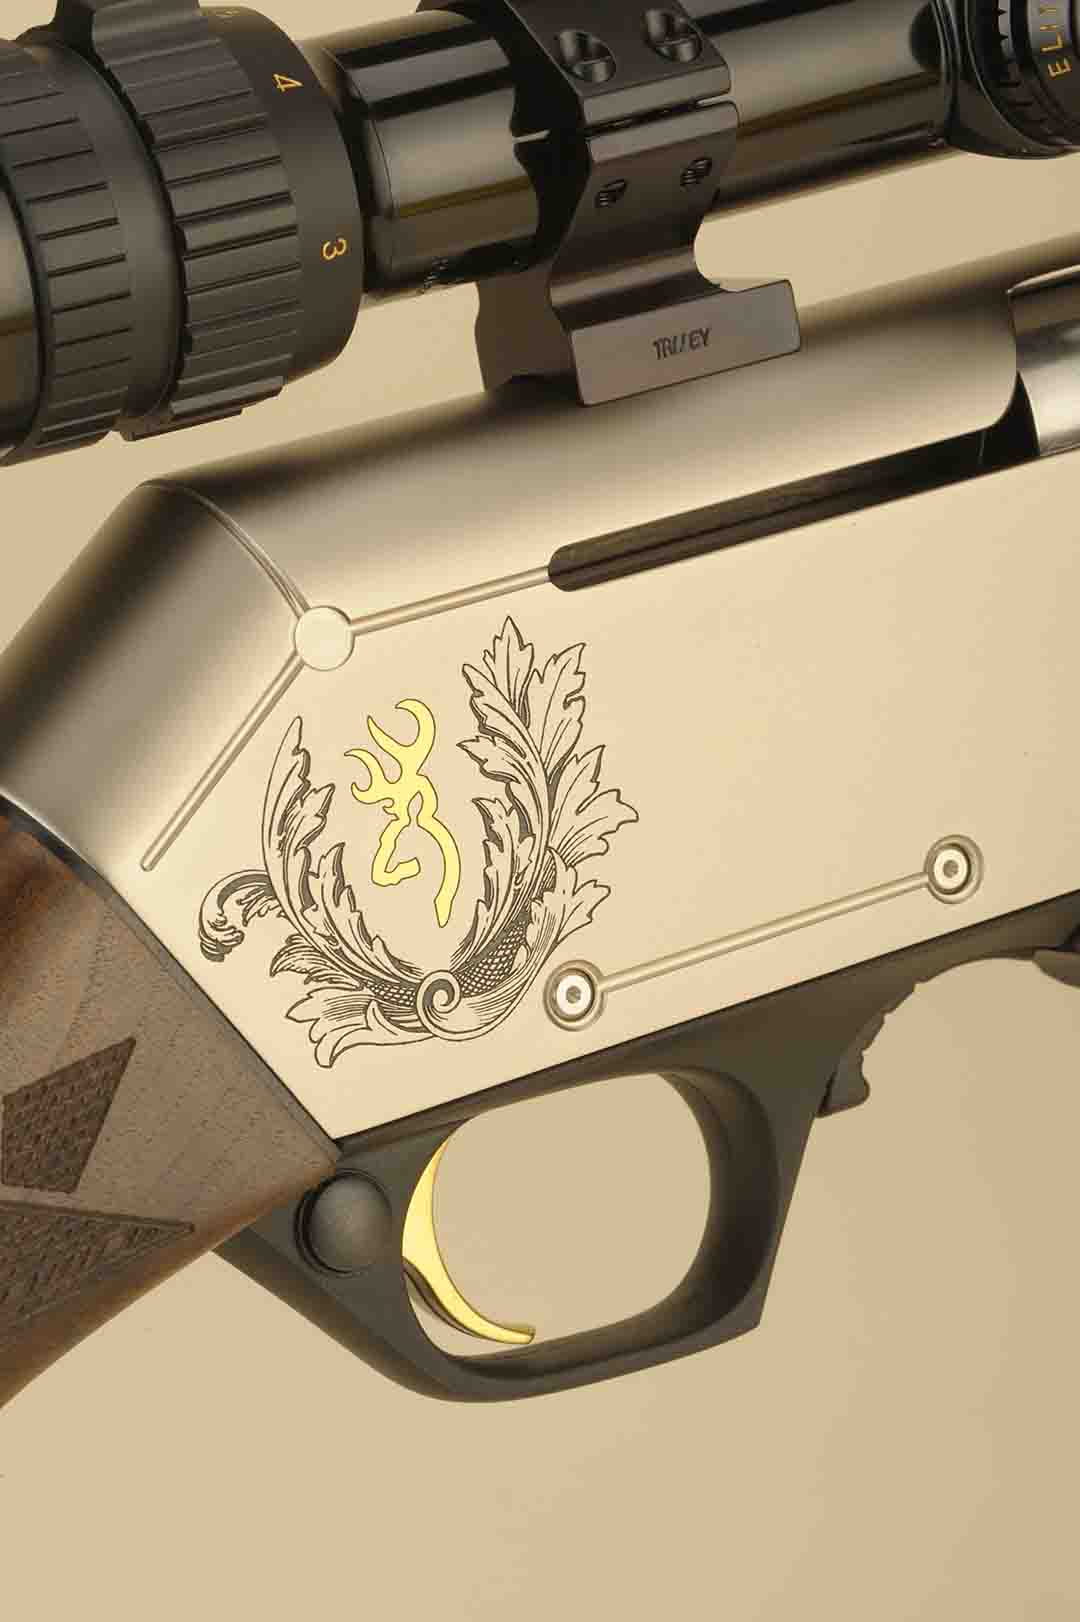 This photo shows the detailing with the MK 3 model with the high relief engraving. The cross bolt safety is standard as well as the gold-plated trigger.